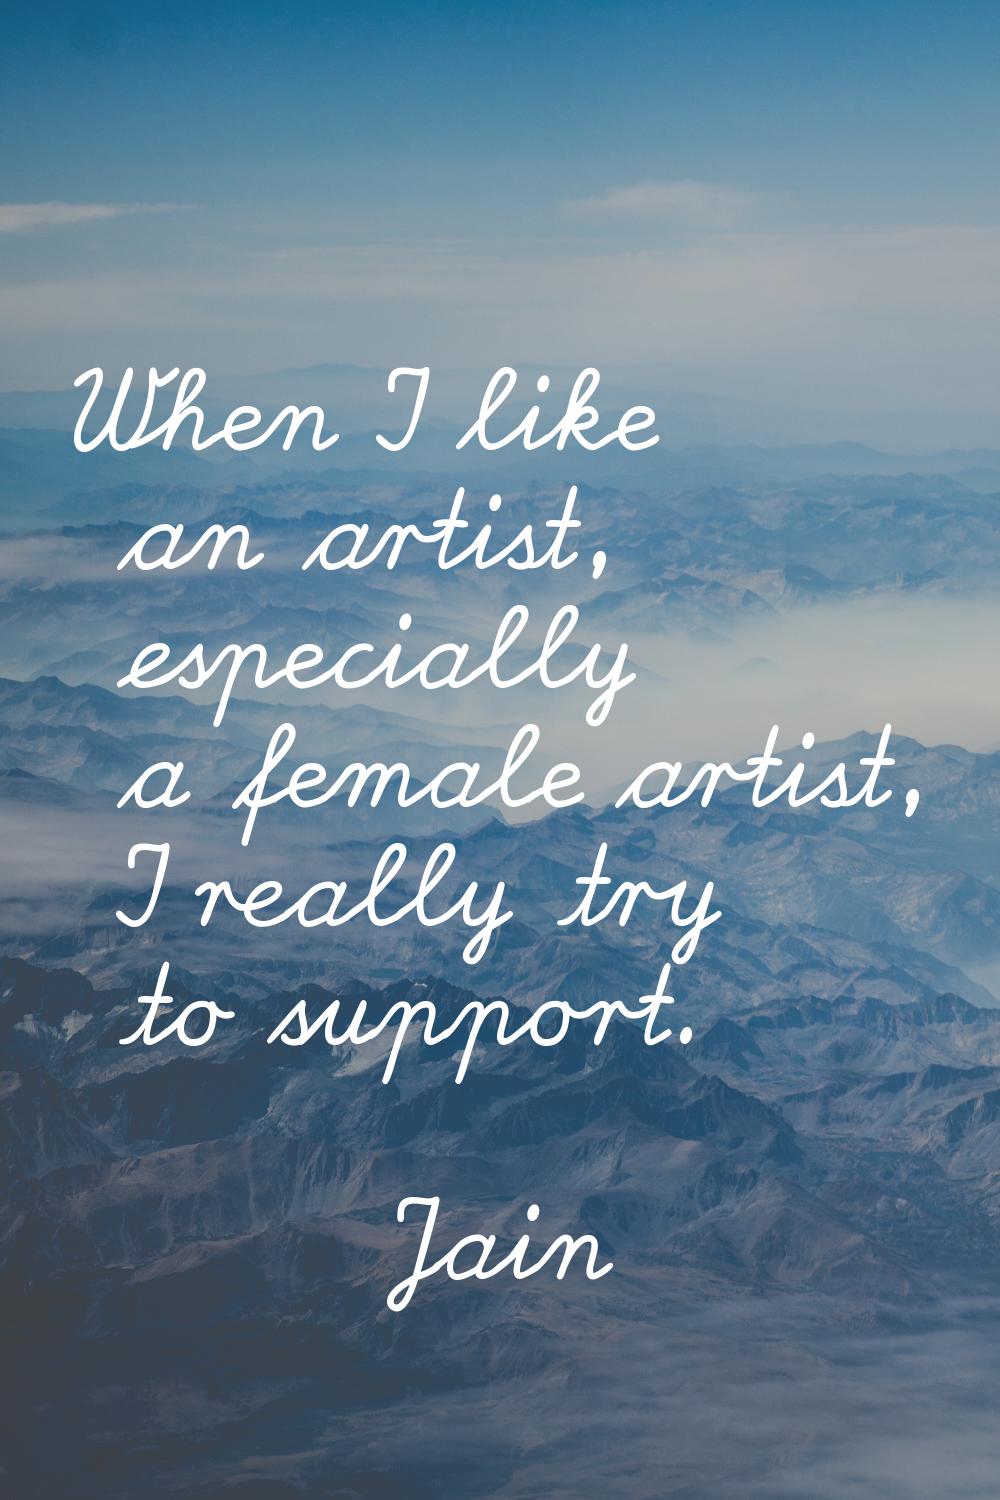 When I like an artist, especially a female artist, I really try to support.